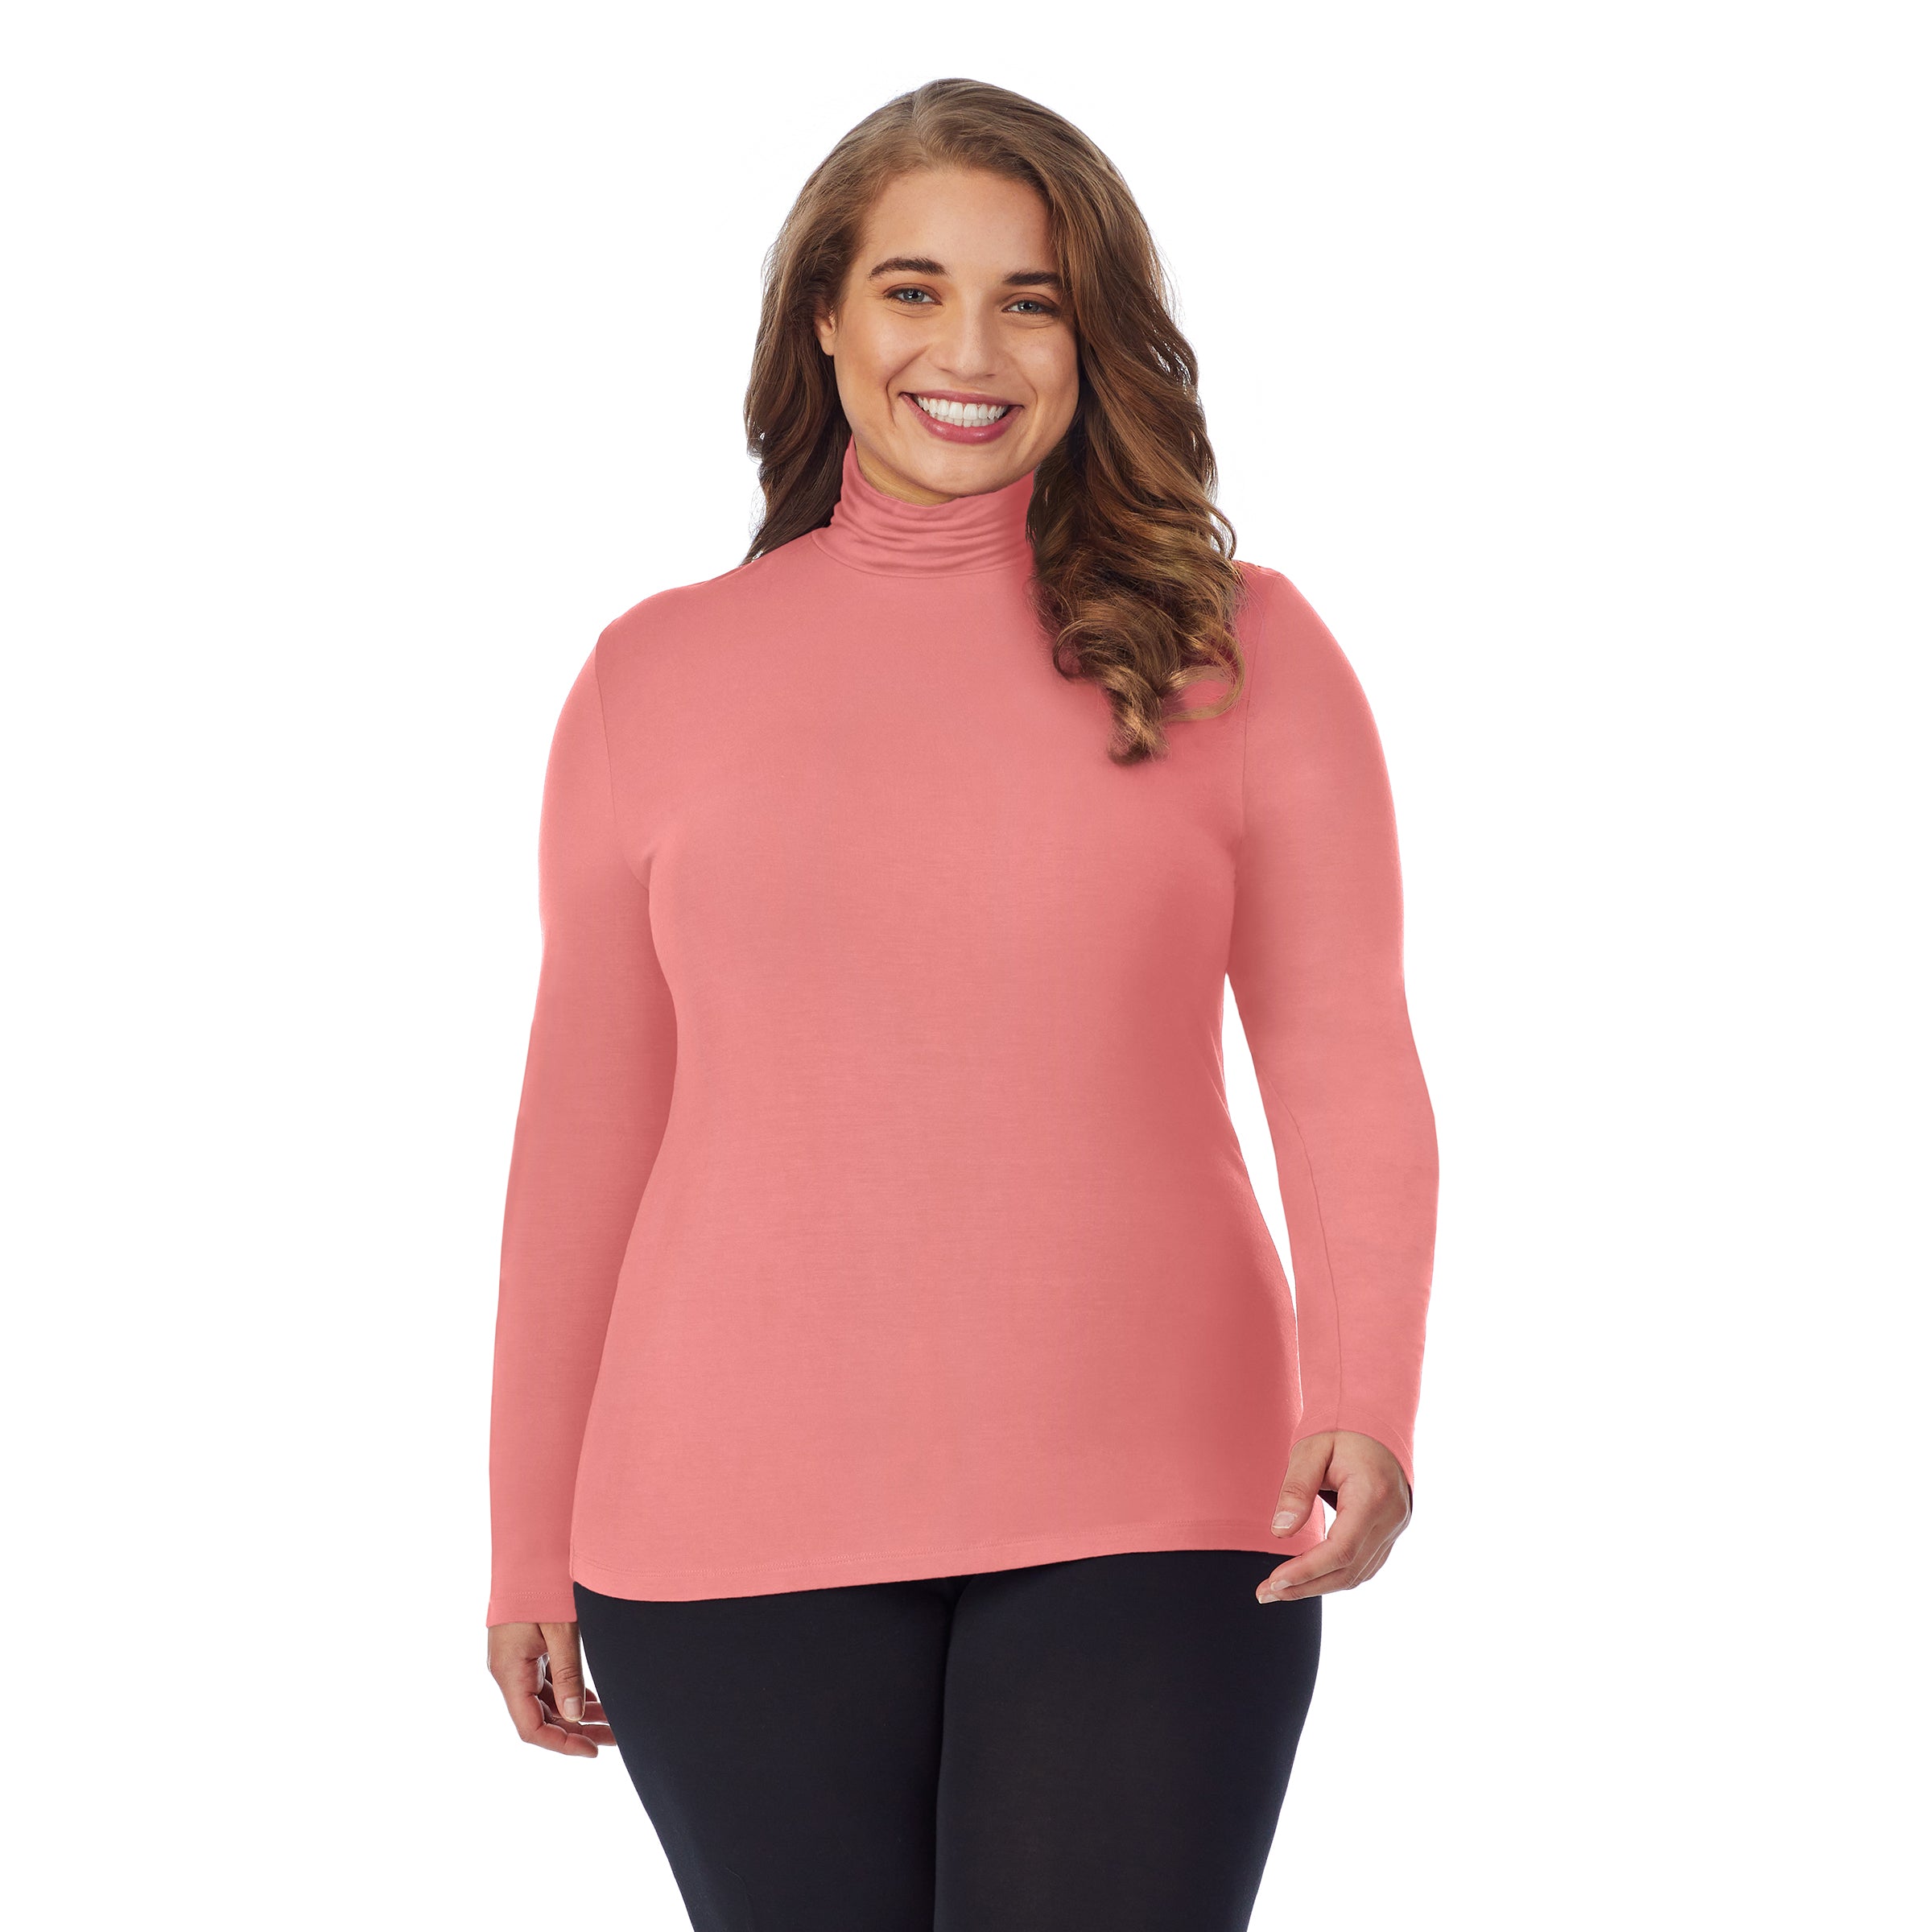 Softwear With Stretch Long Sleeve Turtleneck PLUS